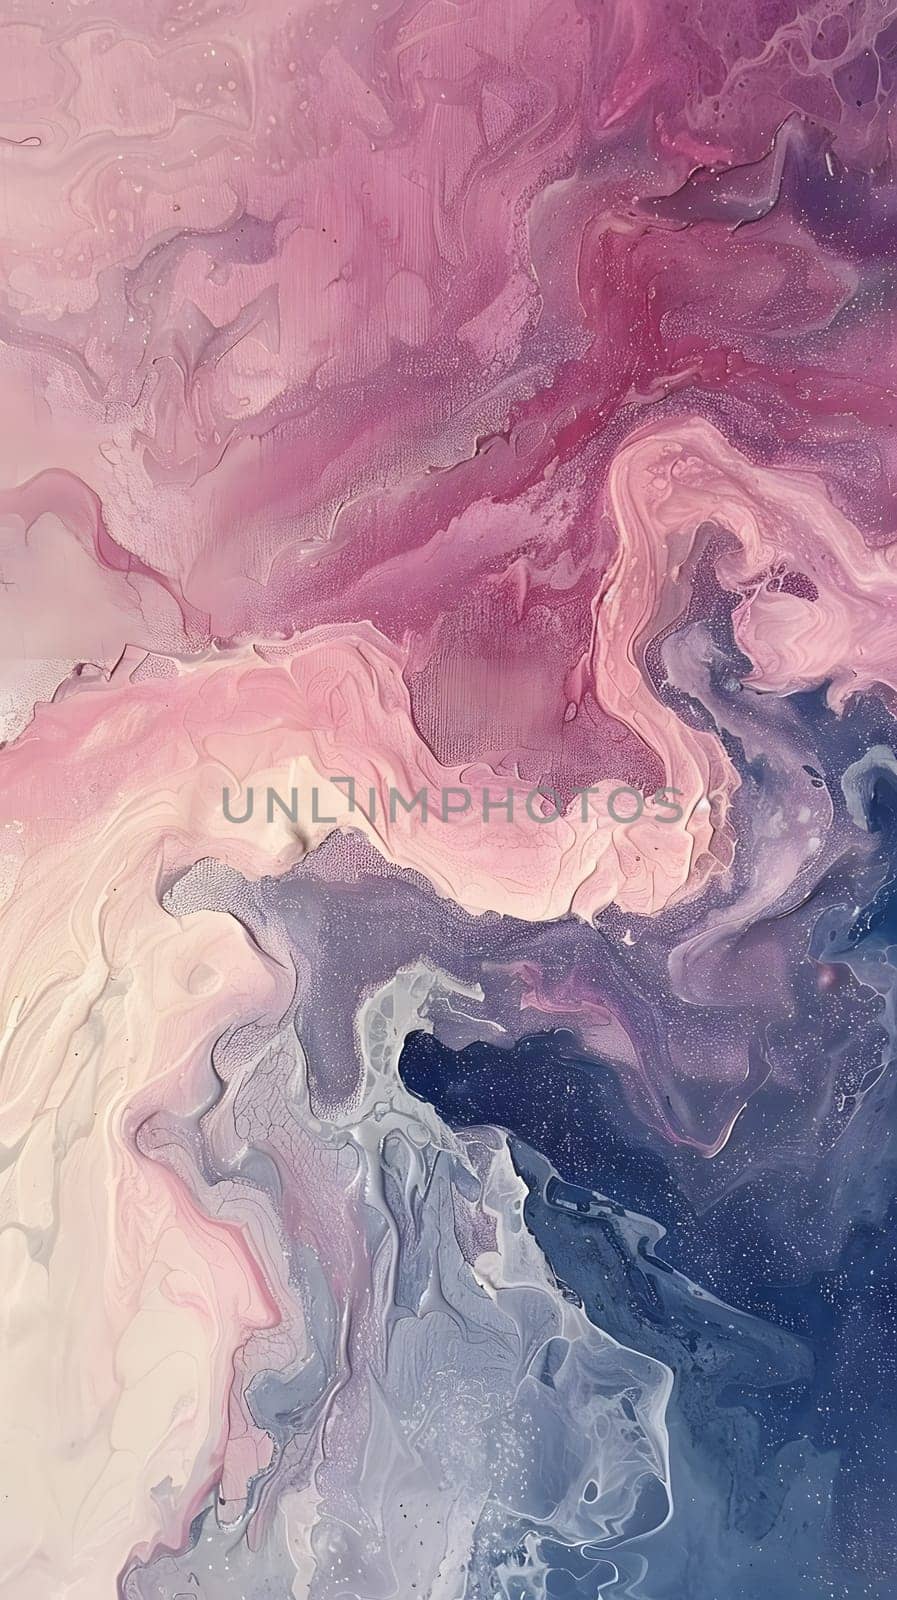 Close up of a waterthemed art landscape in pink, purple, and blue colors by Nadtochiy